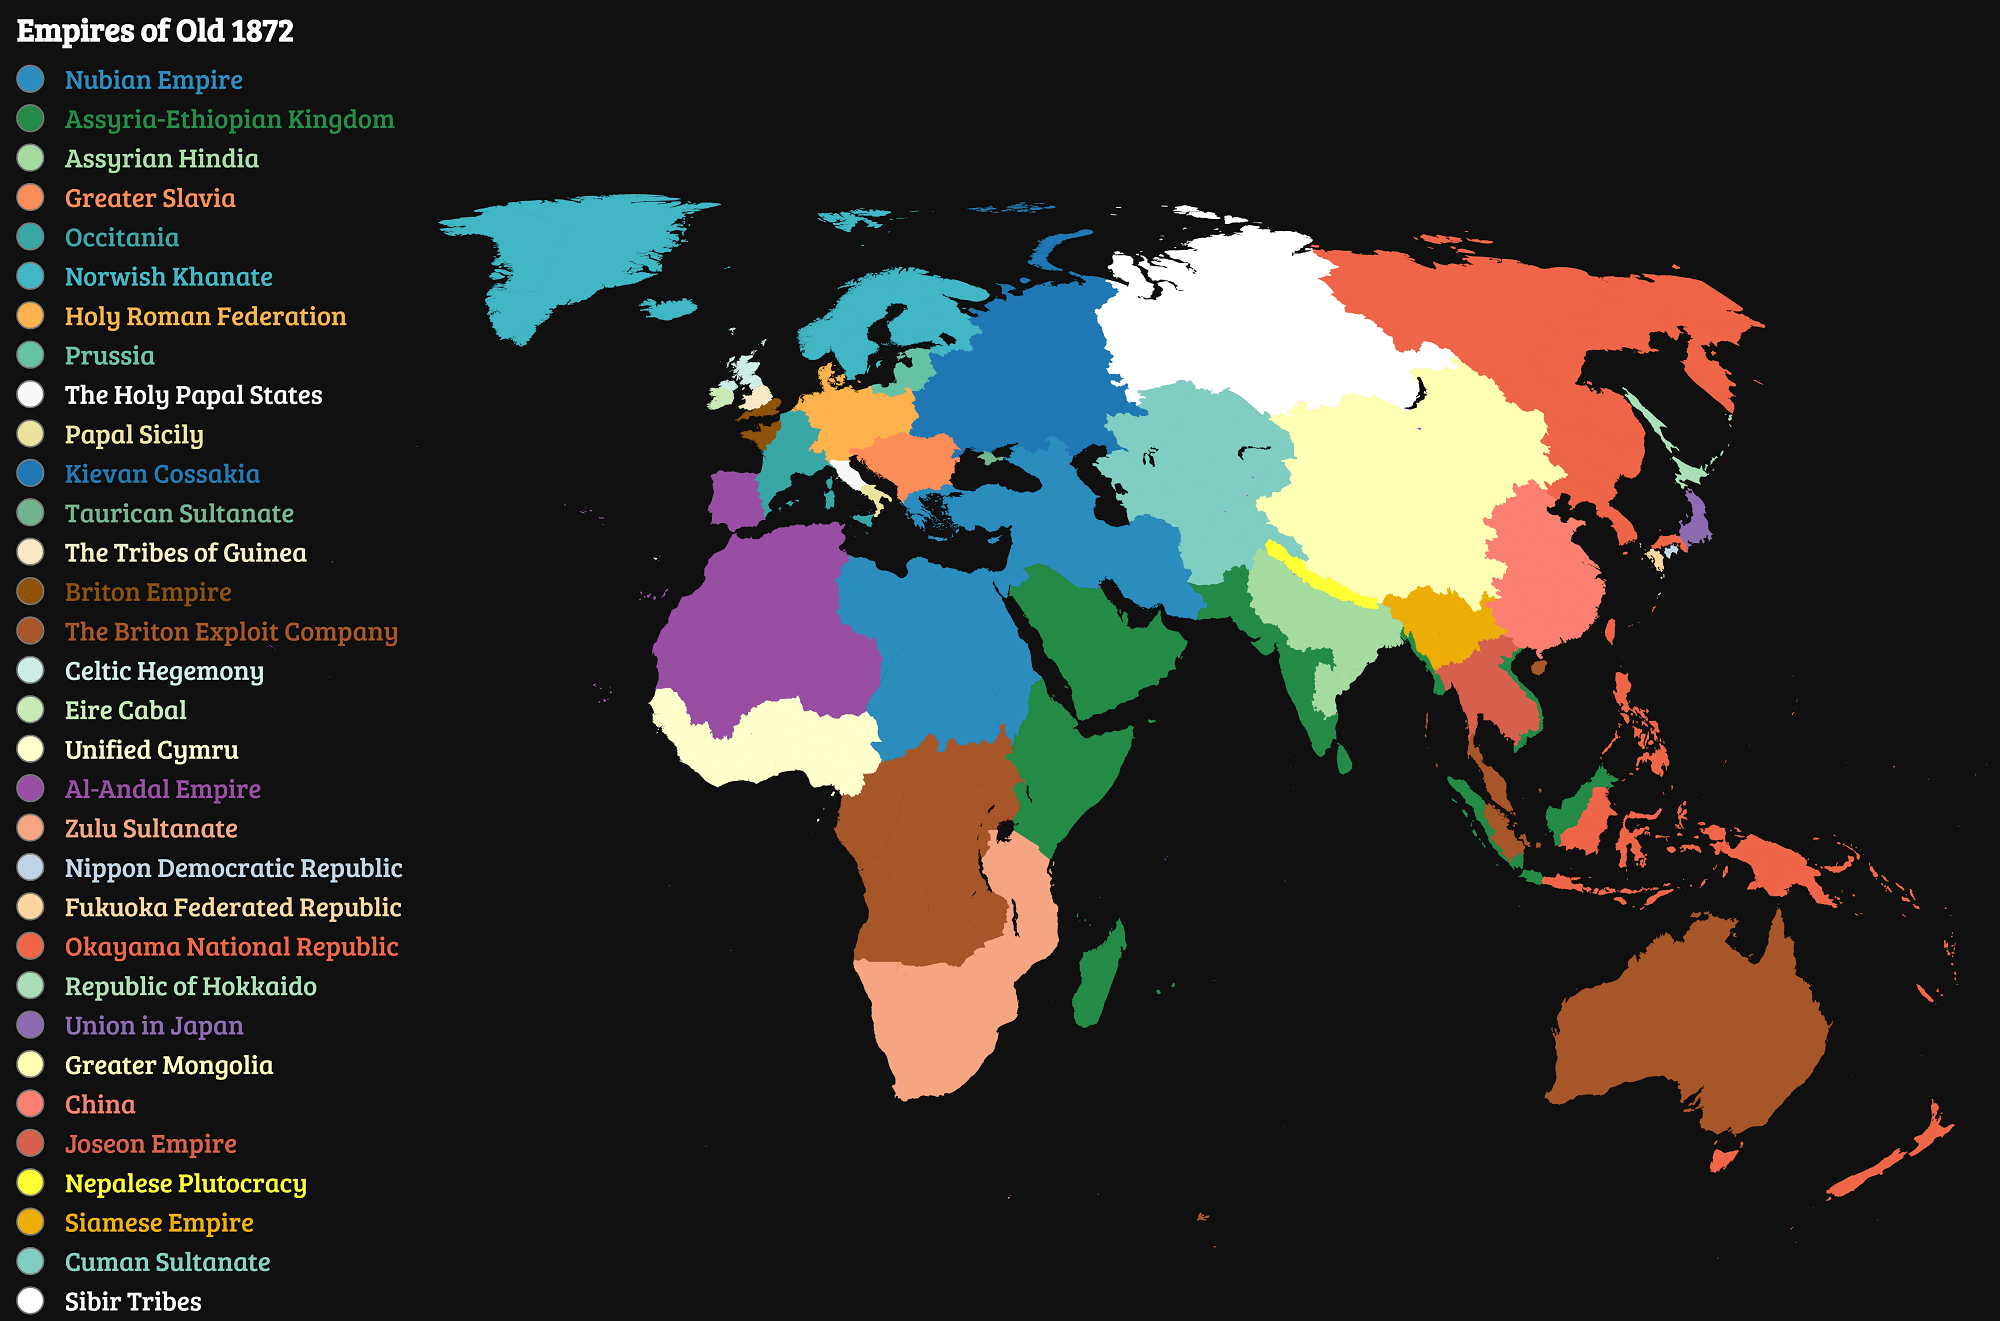 Empires_of_Old_1872-min-min.png